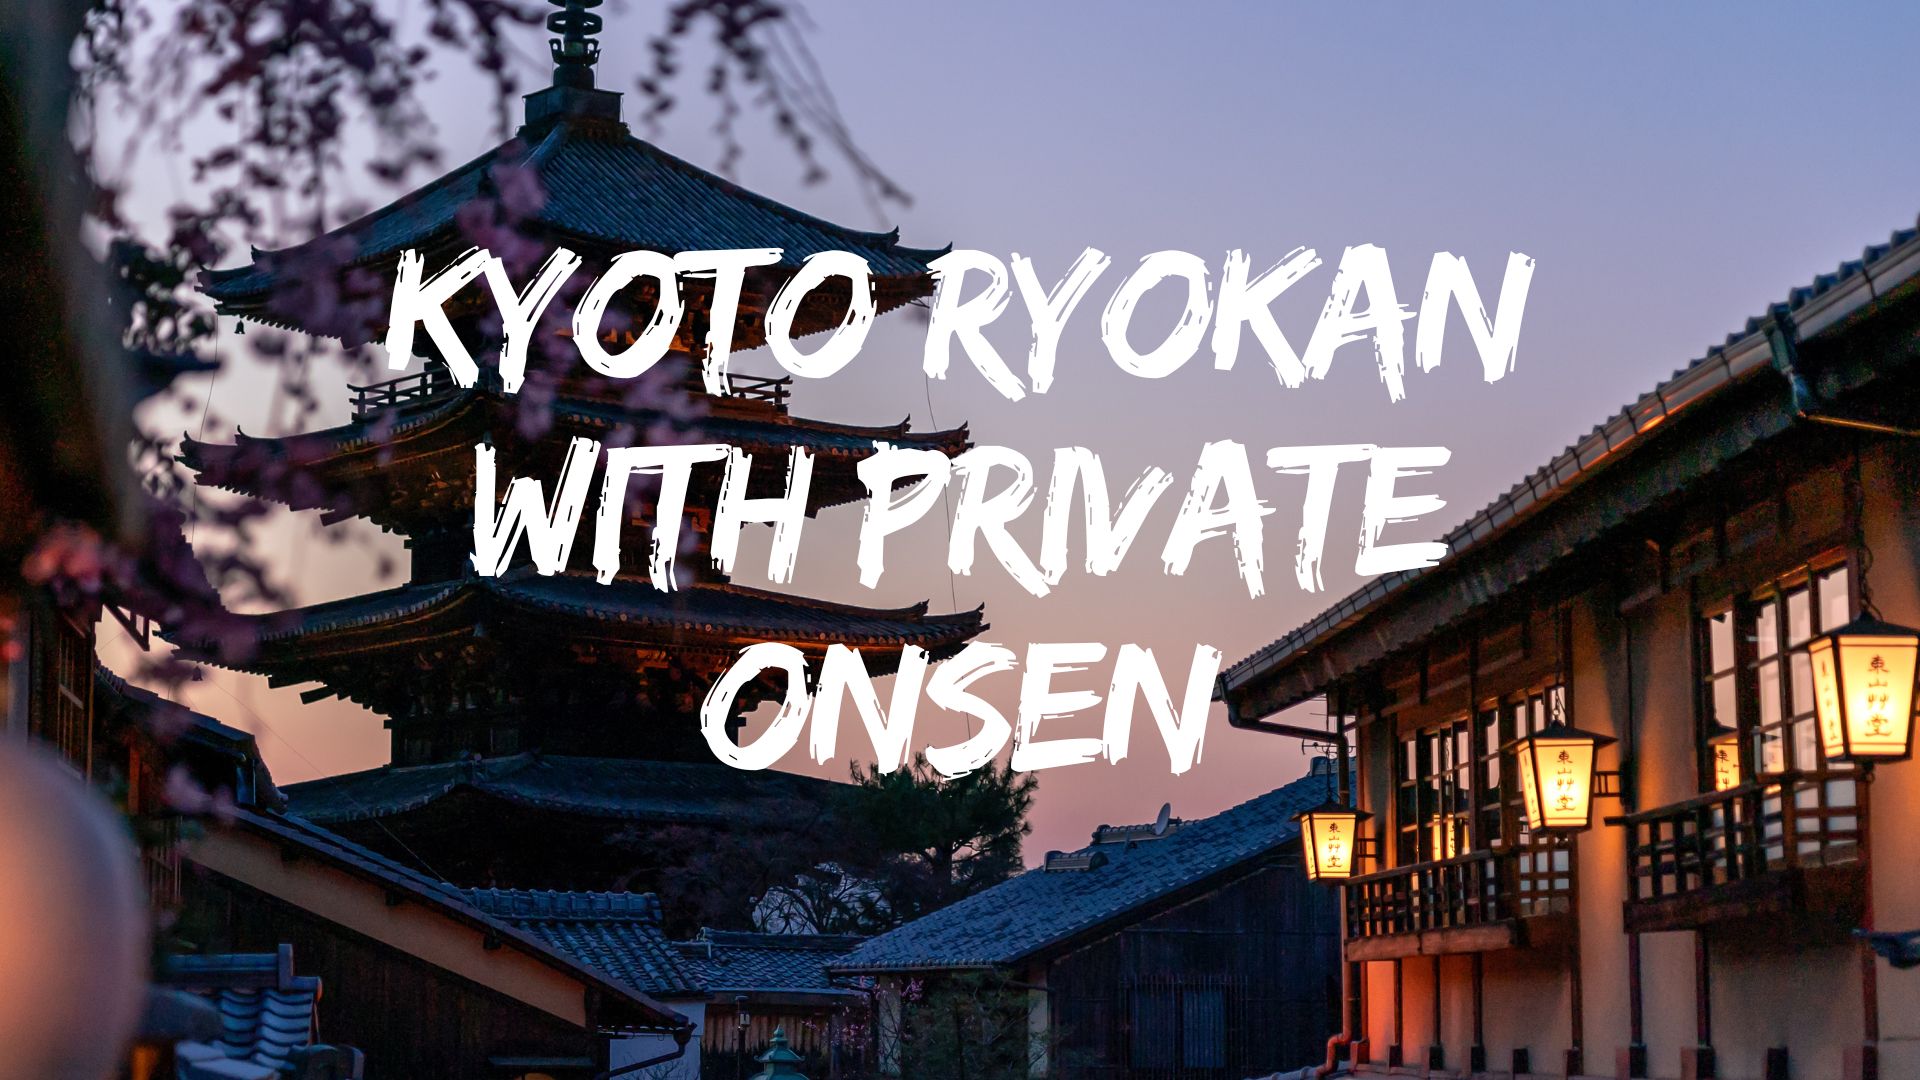 Kyoto ryokan with private onsen, Kyoto hotels with private onsen, private onsen in Japan, where to stay in Kyoto with private onsen cover, Ryokan in Kyoto with private onsen